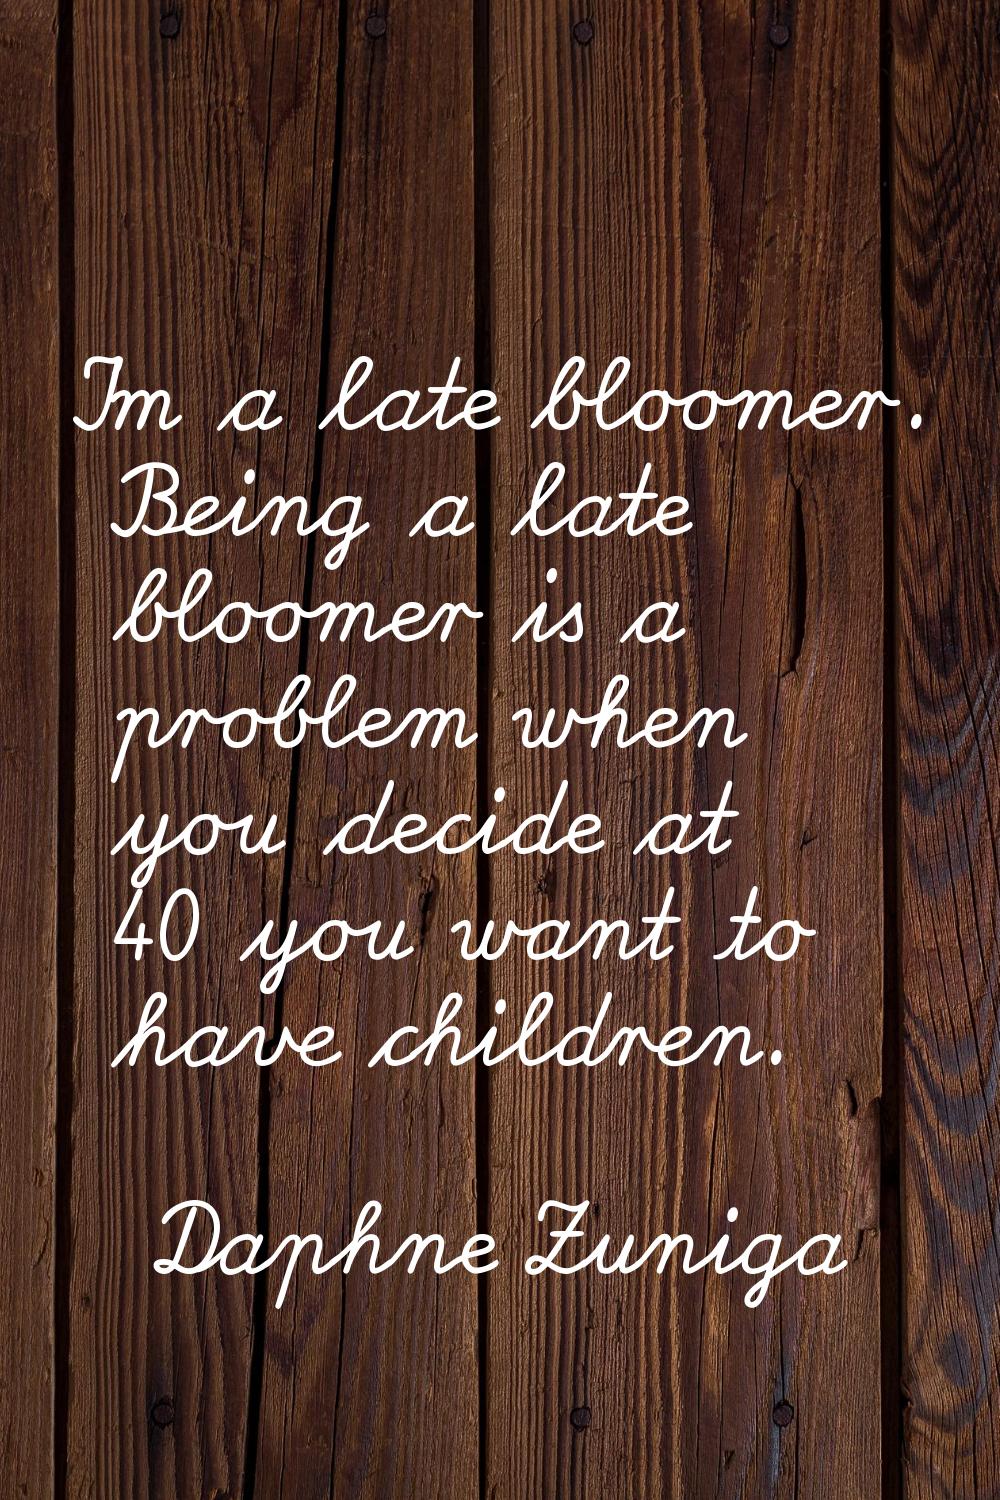 I'm a late bloomer. Being a late bloomer is a problem when you decide at 40 you want to have childr